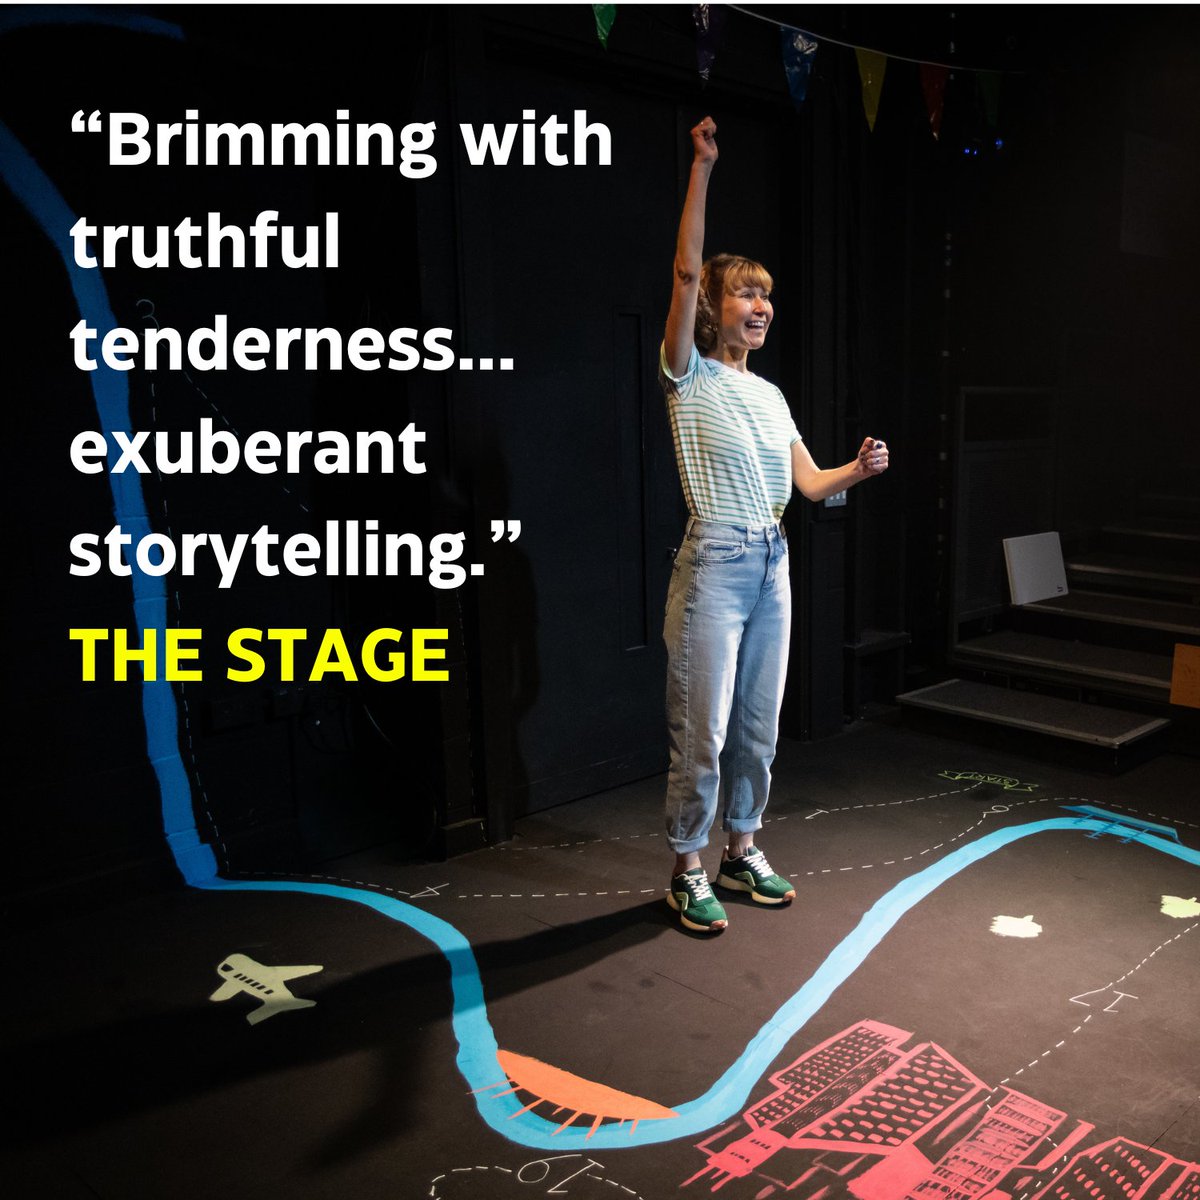 THE LONG RUN is a tender, emotionally rich - and very, very hilarious - story about human connection, cancer diagnosis and long-distance running. Book now to see @KatieArnstein's ⭐️⭐️⭐️⭐️⭐️production - must end Apr 13! newdiorama.com/whats-on/the-l…